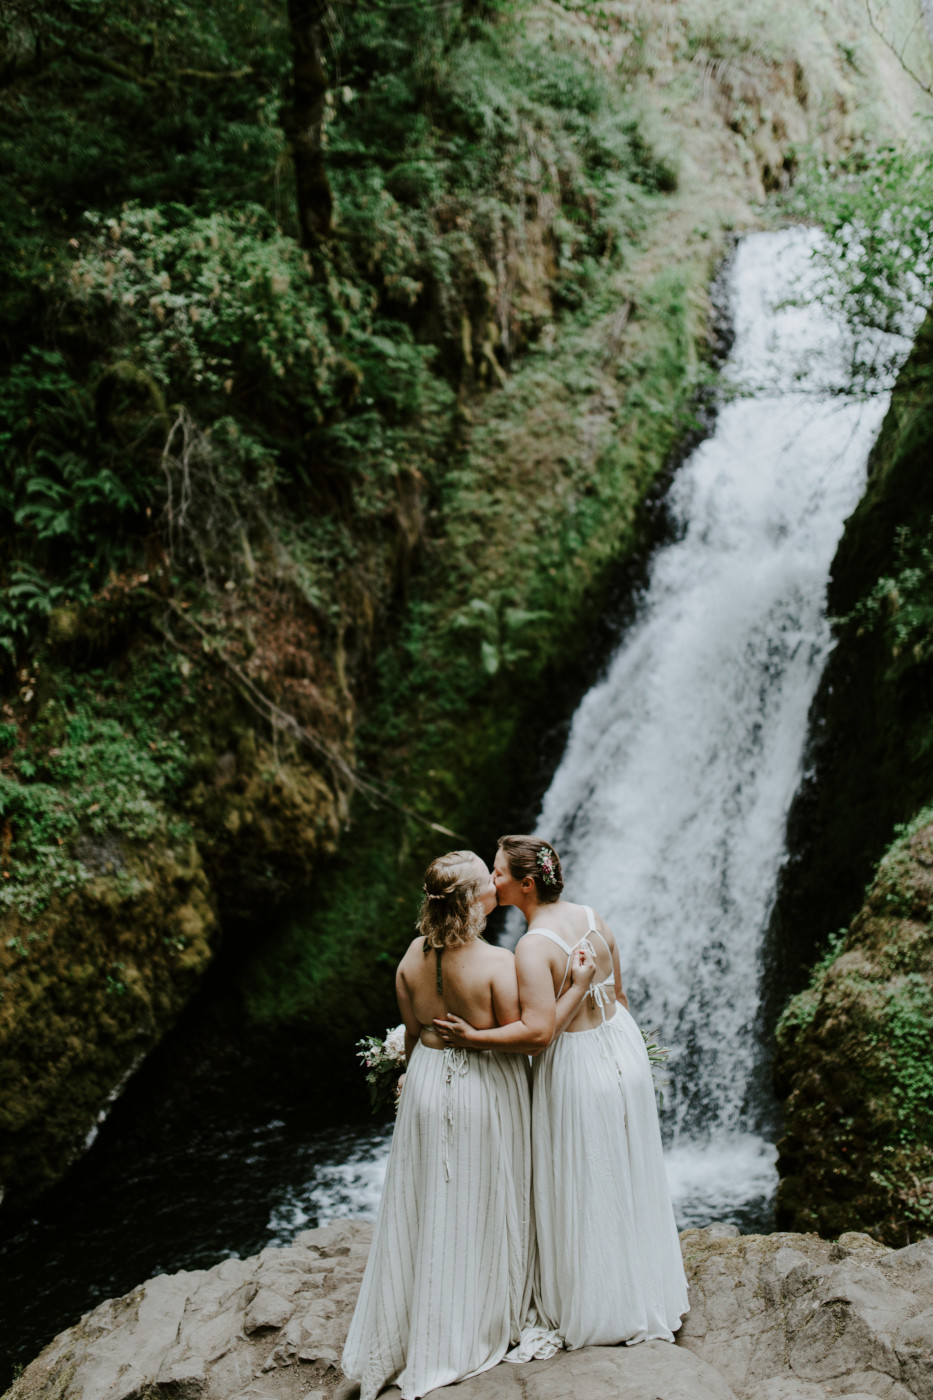 Audrey and Kate kiss. Elopement wedding photography at Bridal Veil Falls by Sienna Plus Josh.